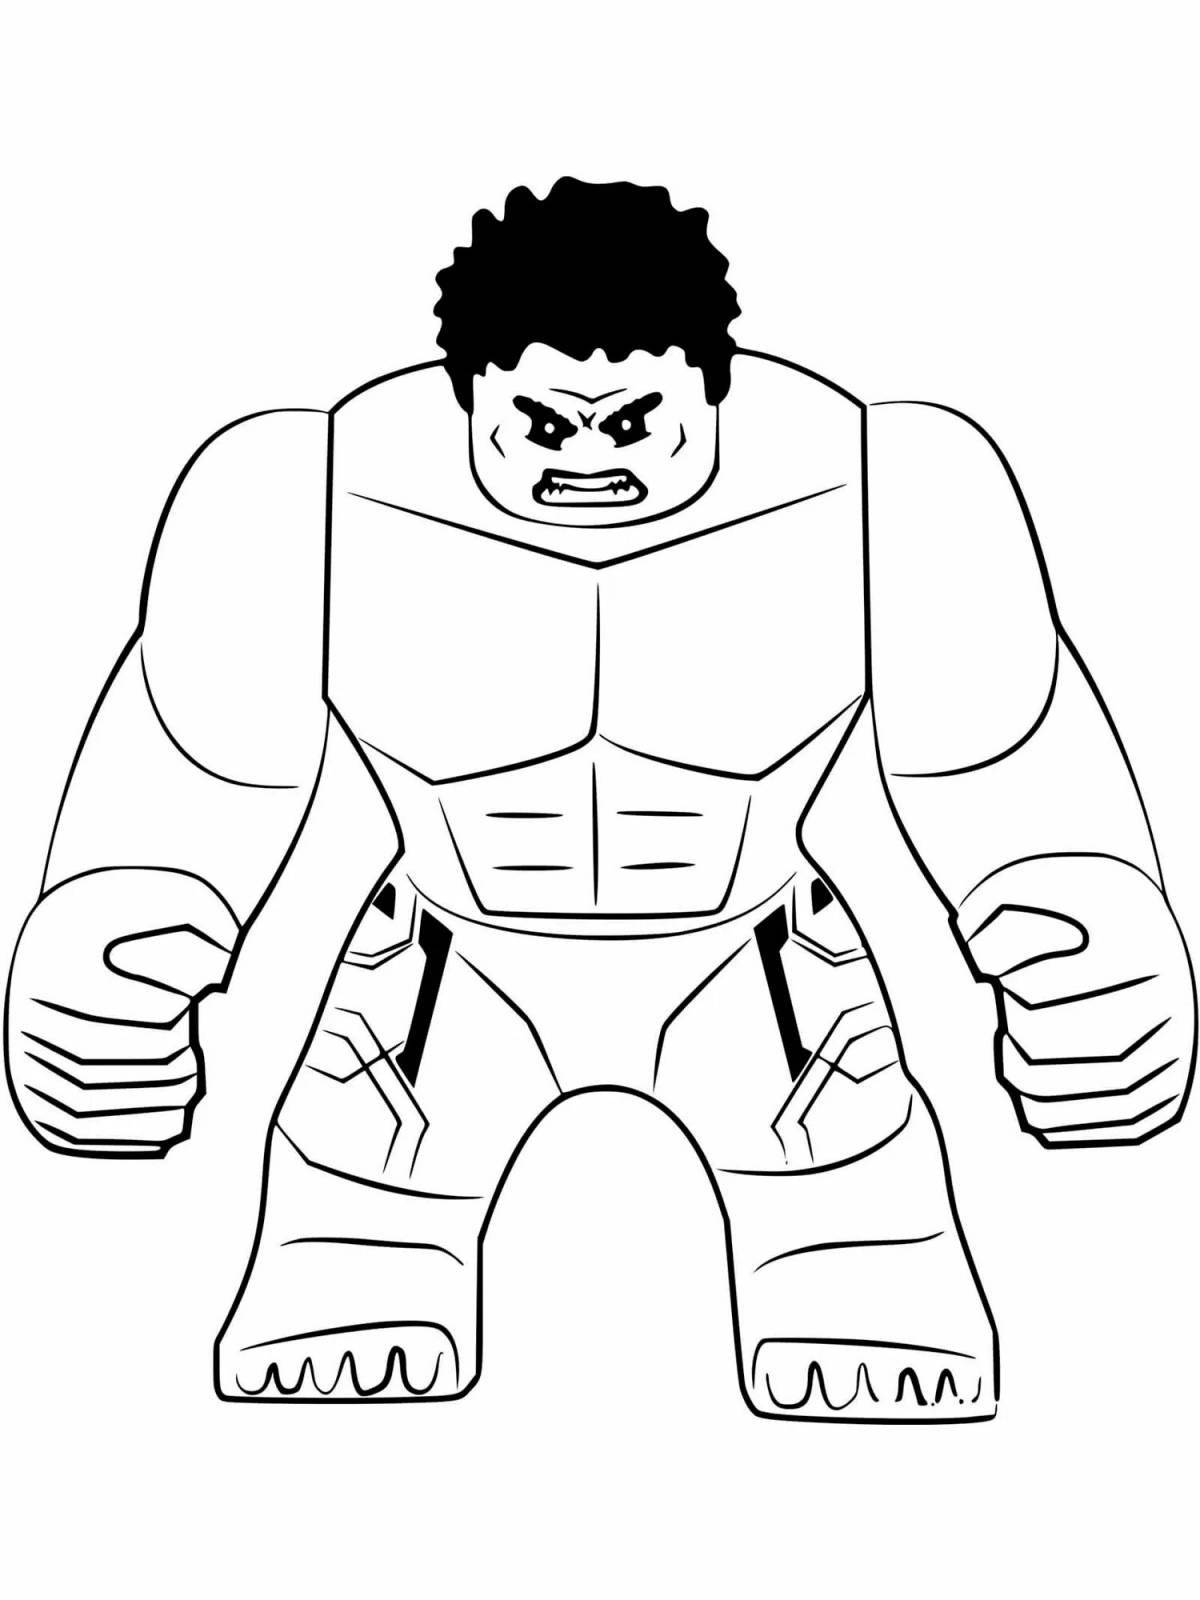 Exciting hulk coloring book for boys